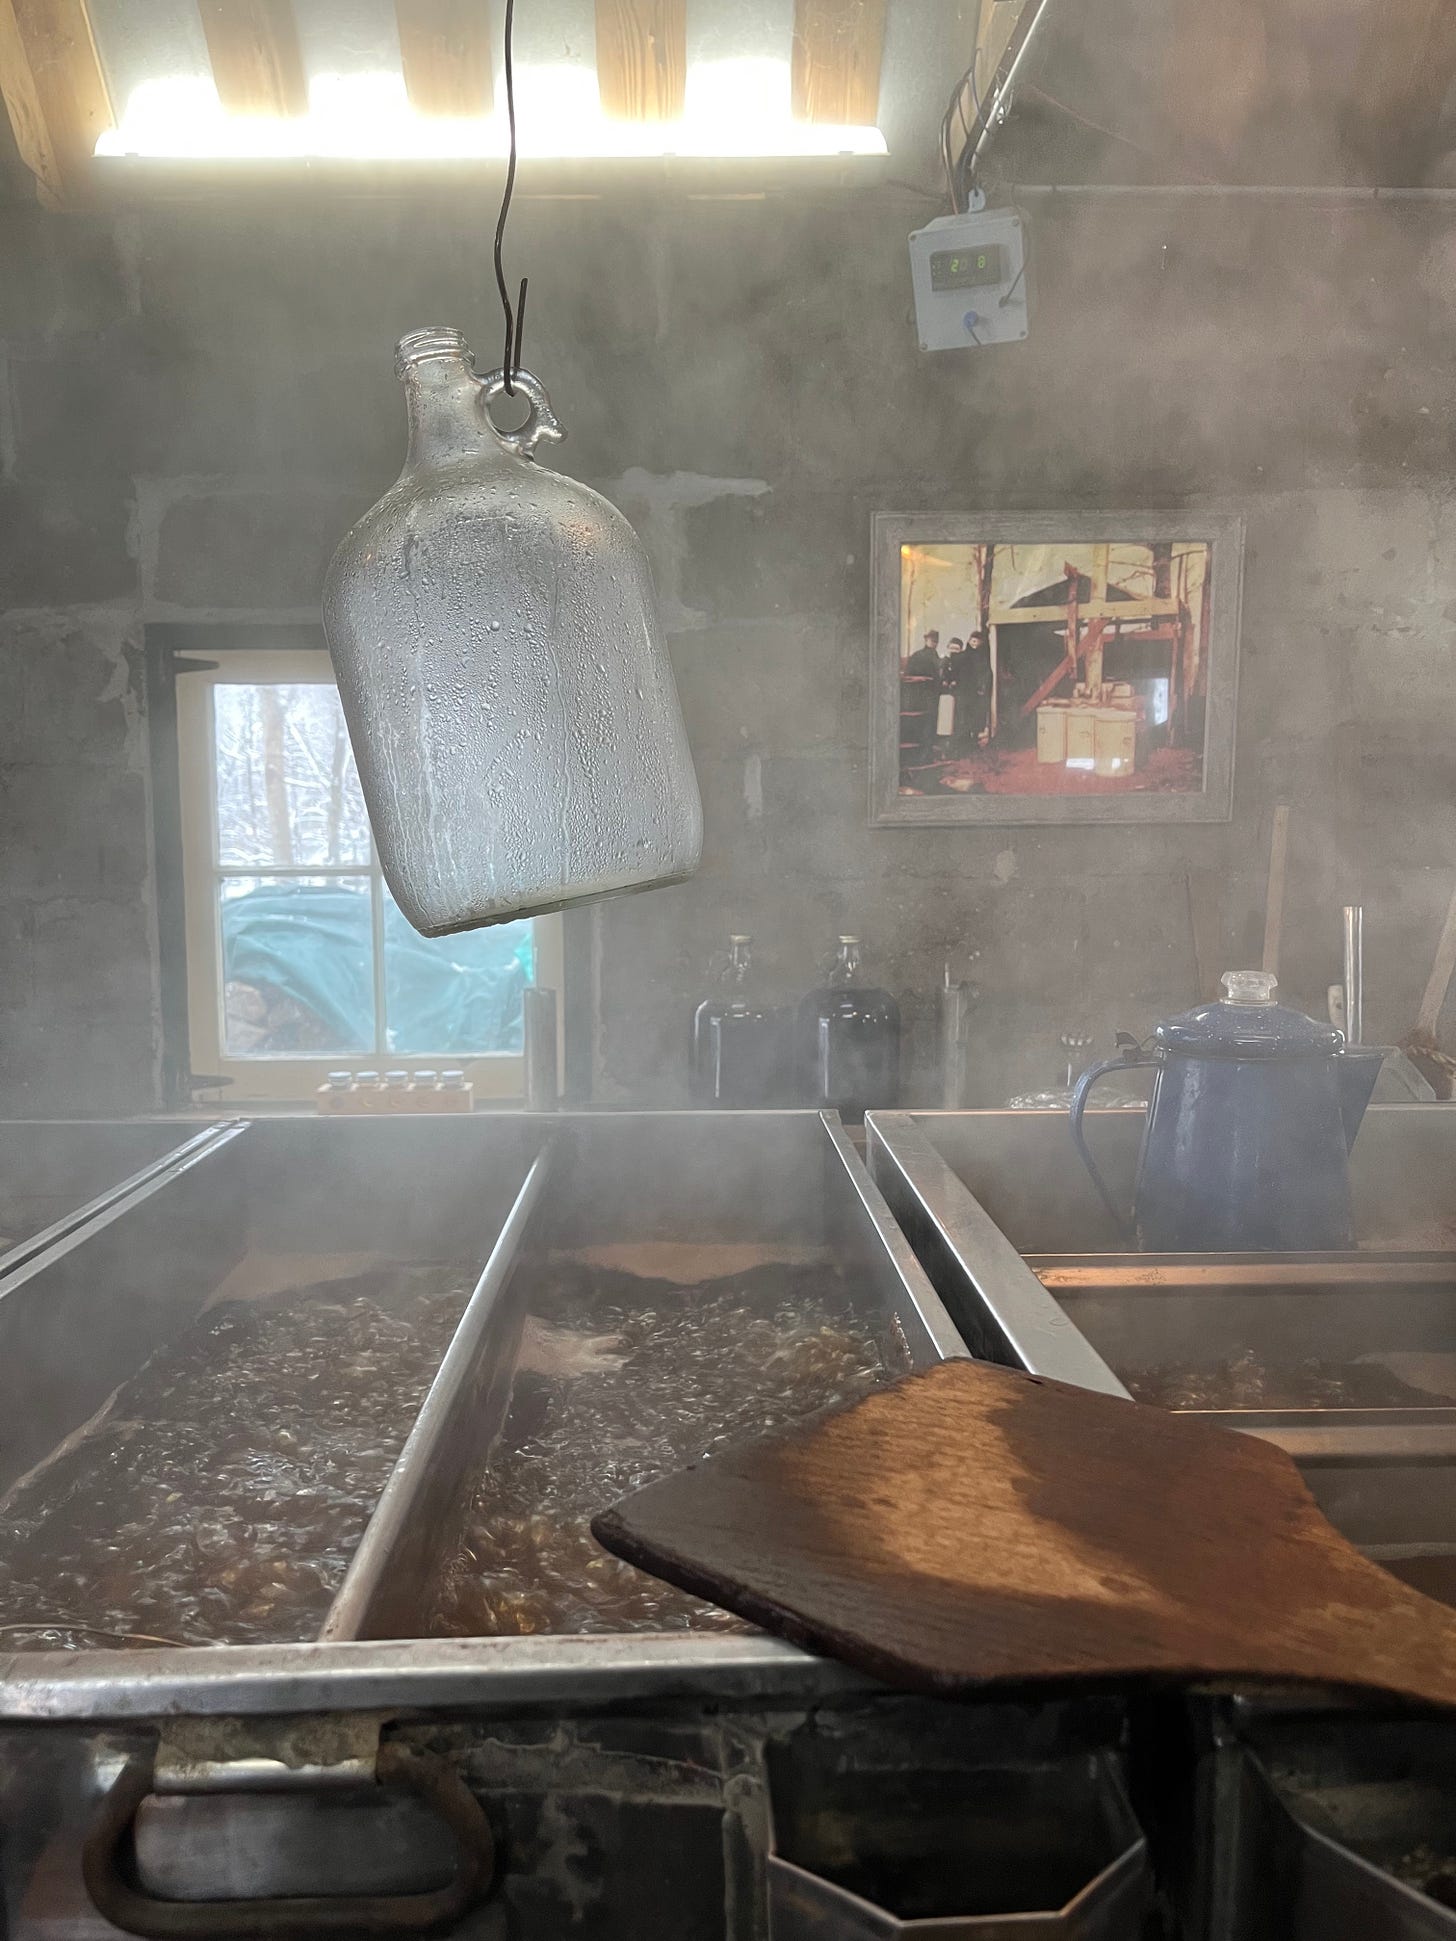 A photo of maple sap being boiled to make syrup.